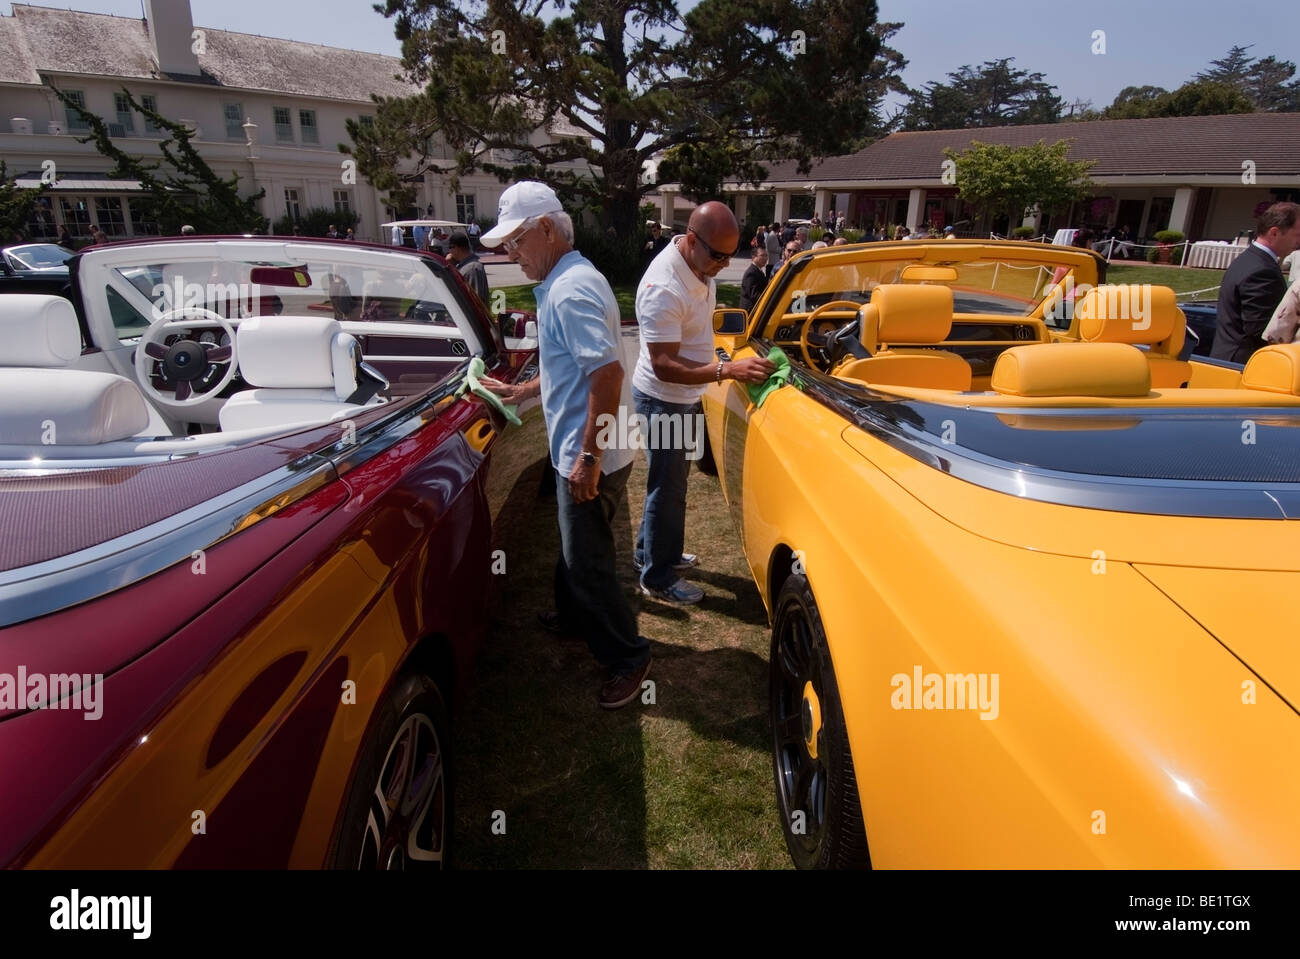 Workmen cleaning 2009 (Yellow) and 10 (Red) Rolls-Royce Drop Head Phantom Coupes at the 2009 Pebble Beach Concours d'Elegance Stock Photo